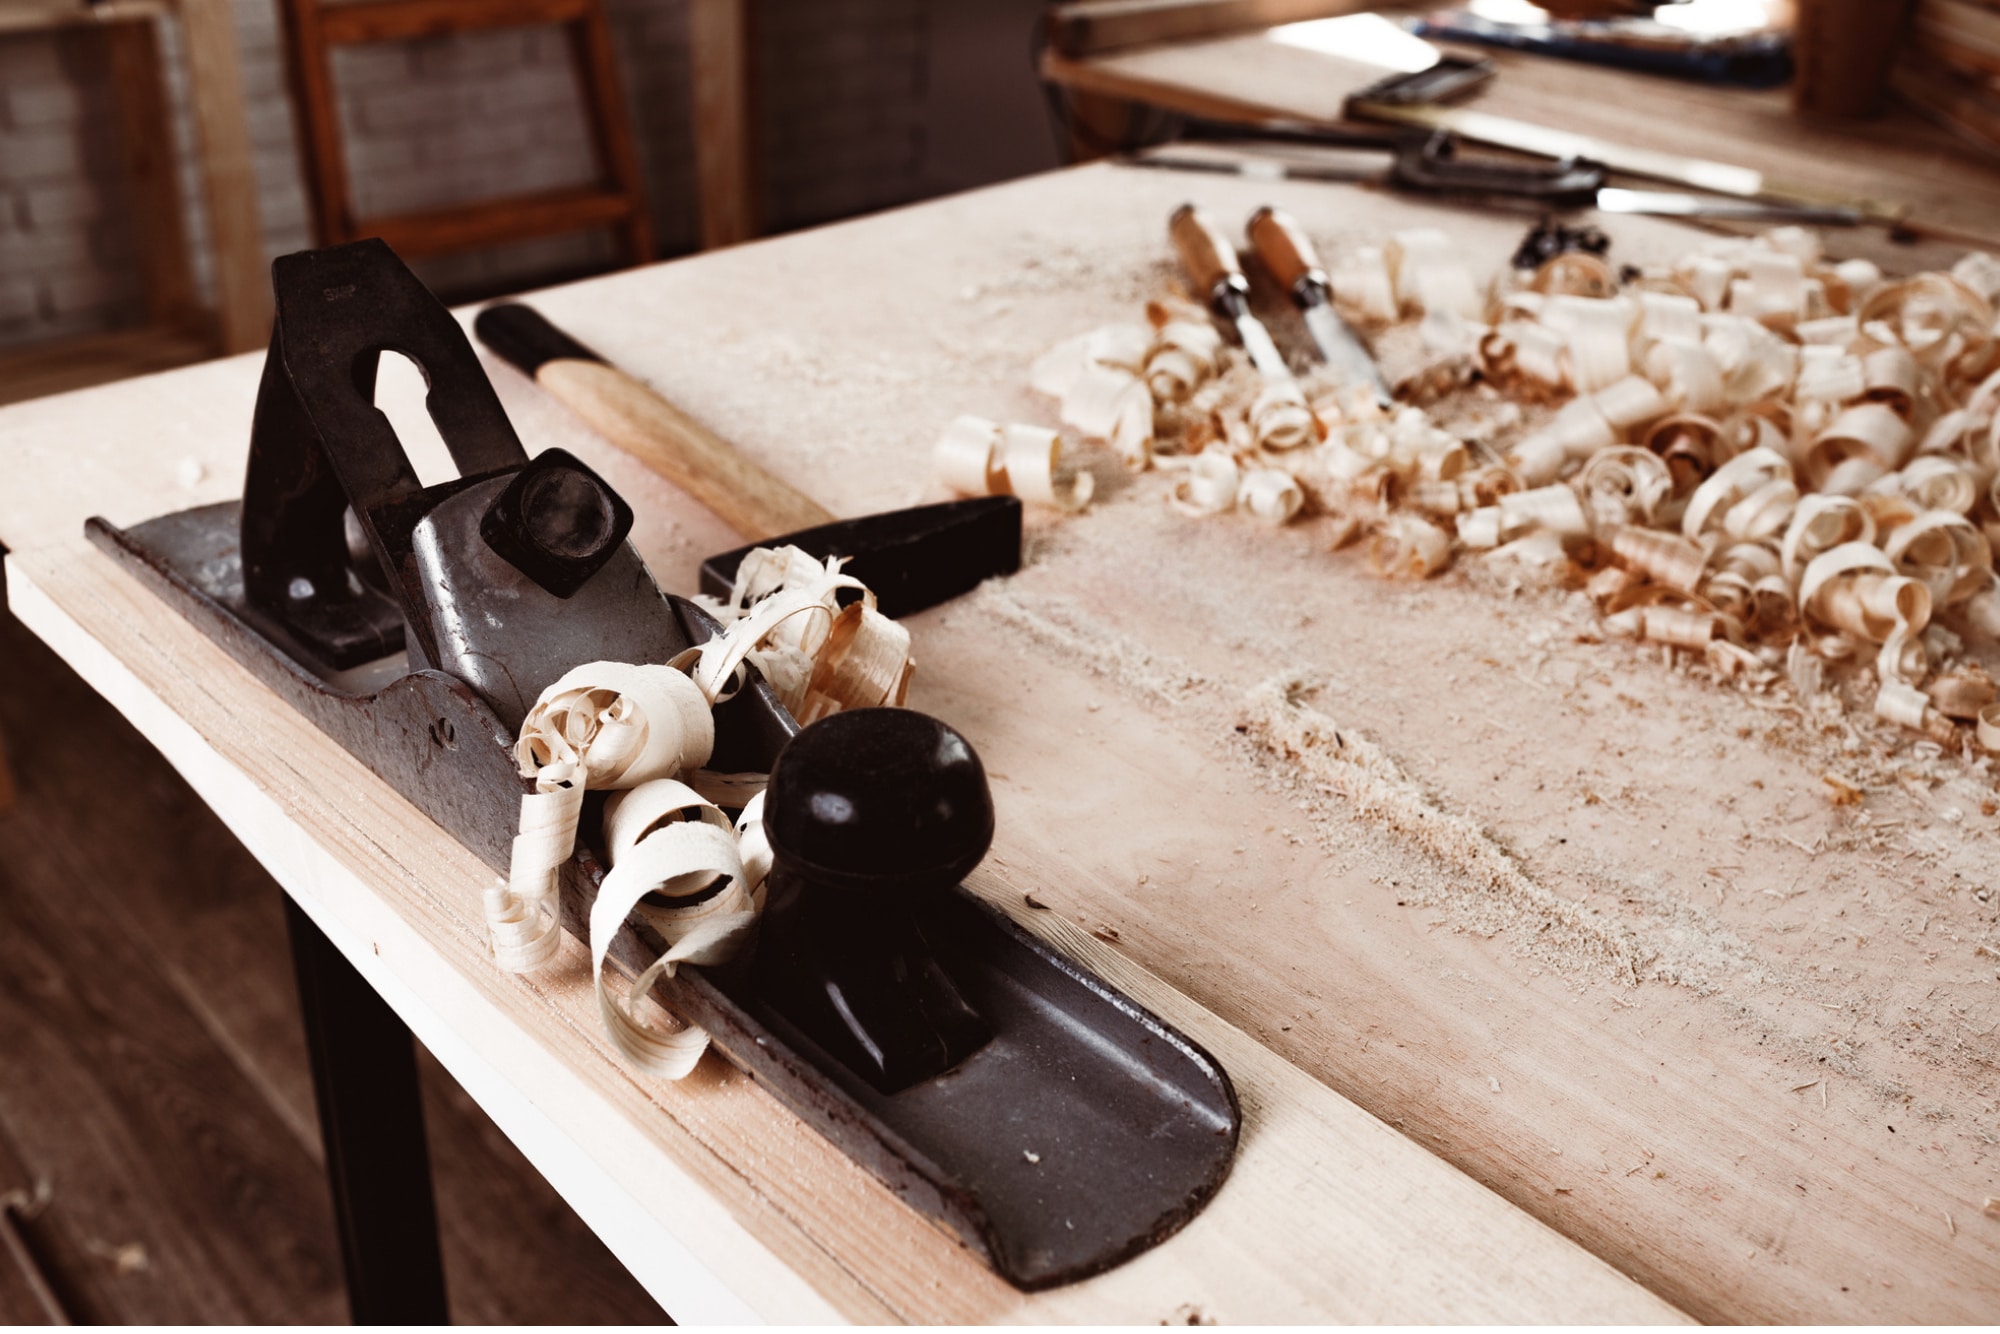 What Are The Parts Of A Metal Scrub Plane?